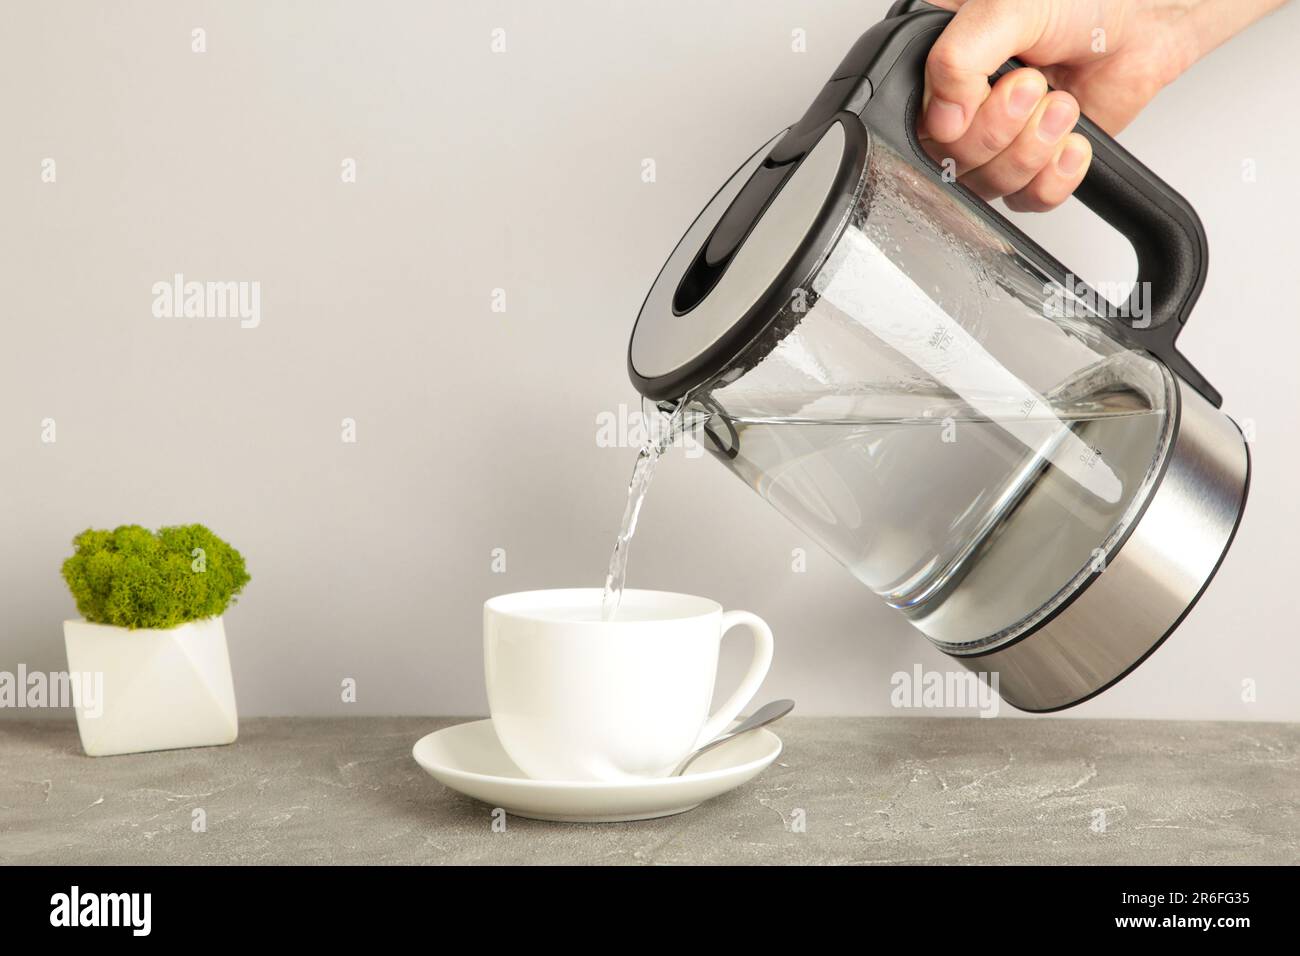 https://c8.alamy.com/comp/2R6FG35/kettle-pouring-boiling-water-into-a-cup-on-grey-background-top-view-2R6FG35.jpg